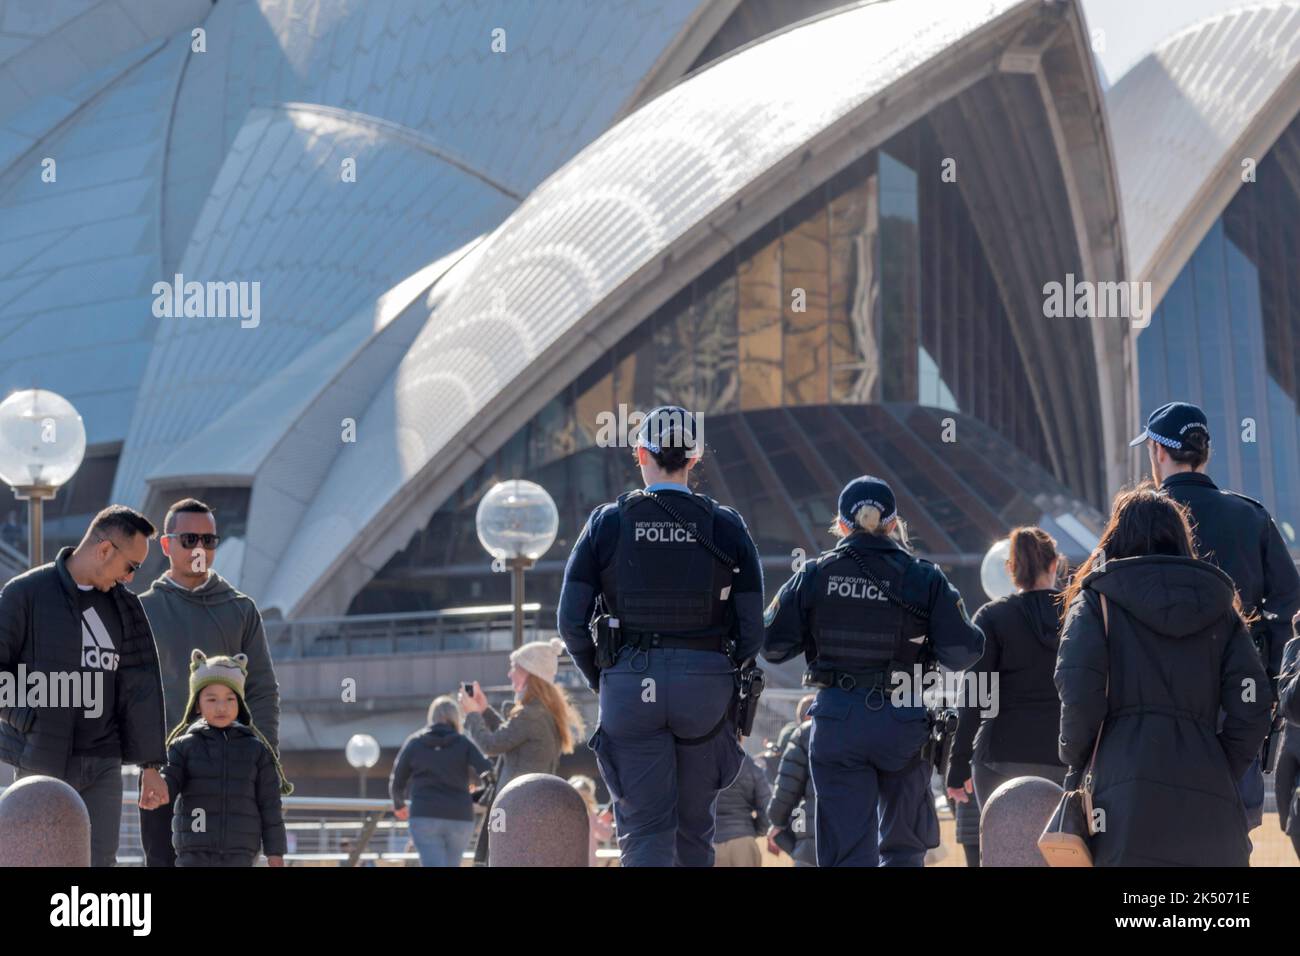 Three New South Wales Police officers on morning foot patrol, carrying side arms, walk around the forecourt of the Sydney Opera House in Australia Stock Photo